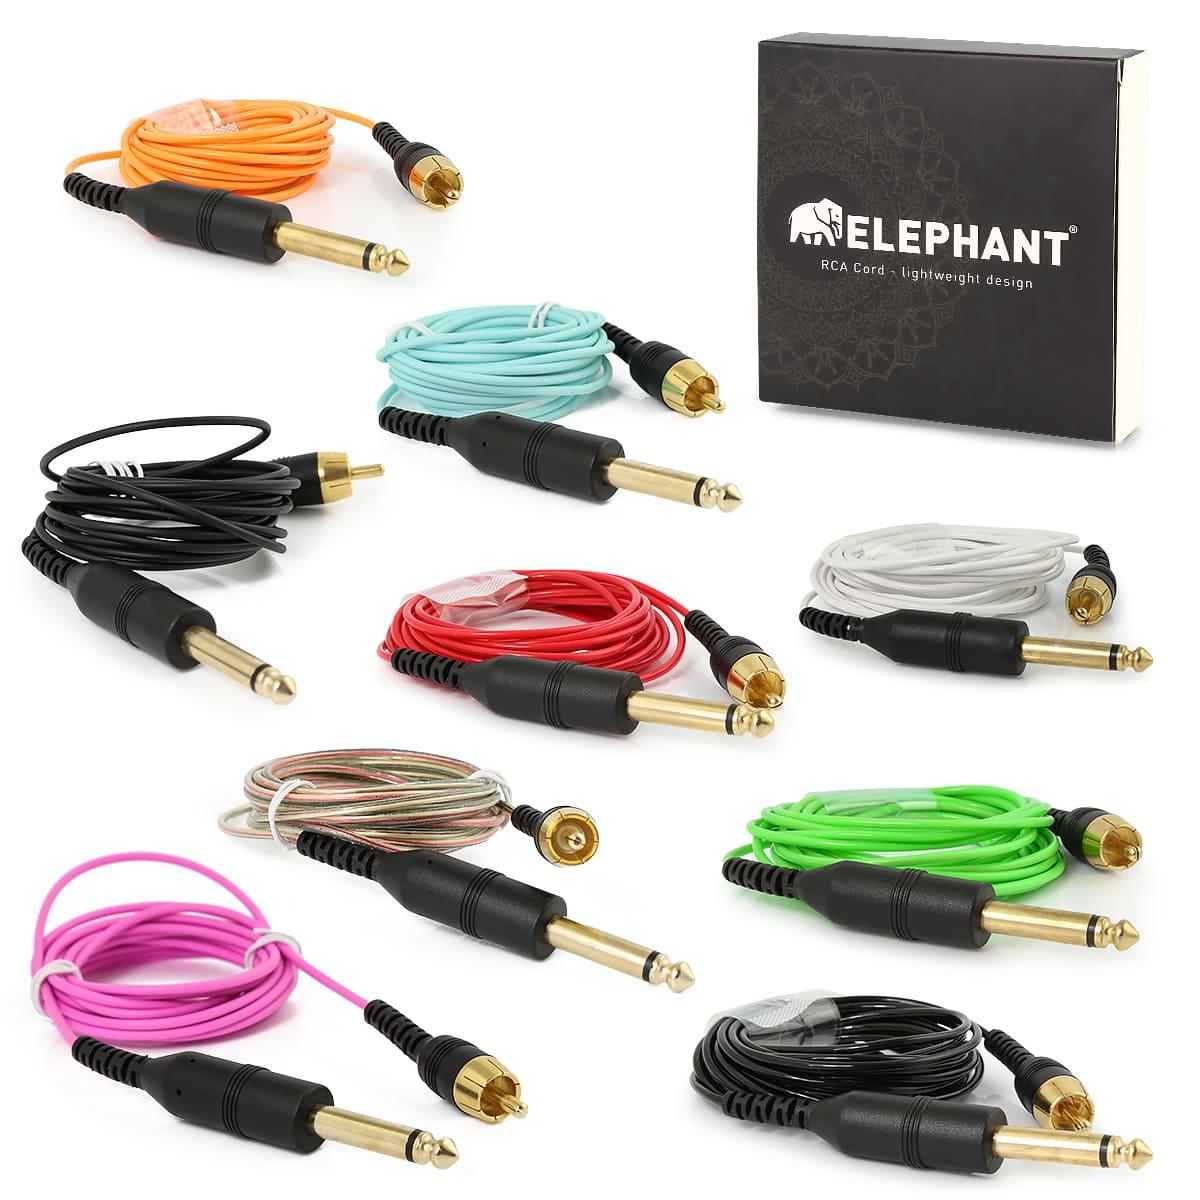 Elephant - Lightweight RCA Cords - Angled - Tattoo Everything Supplies